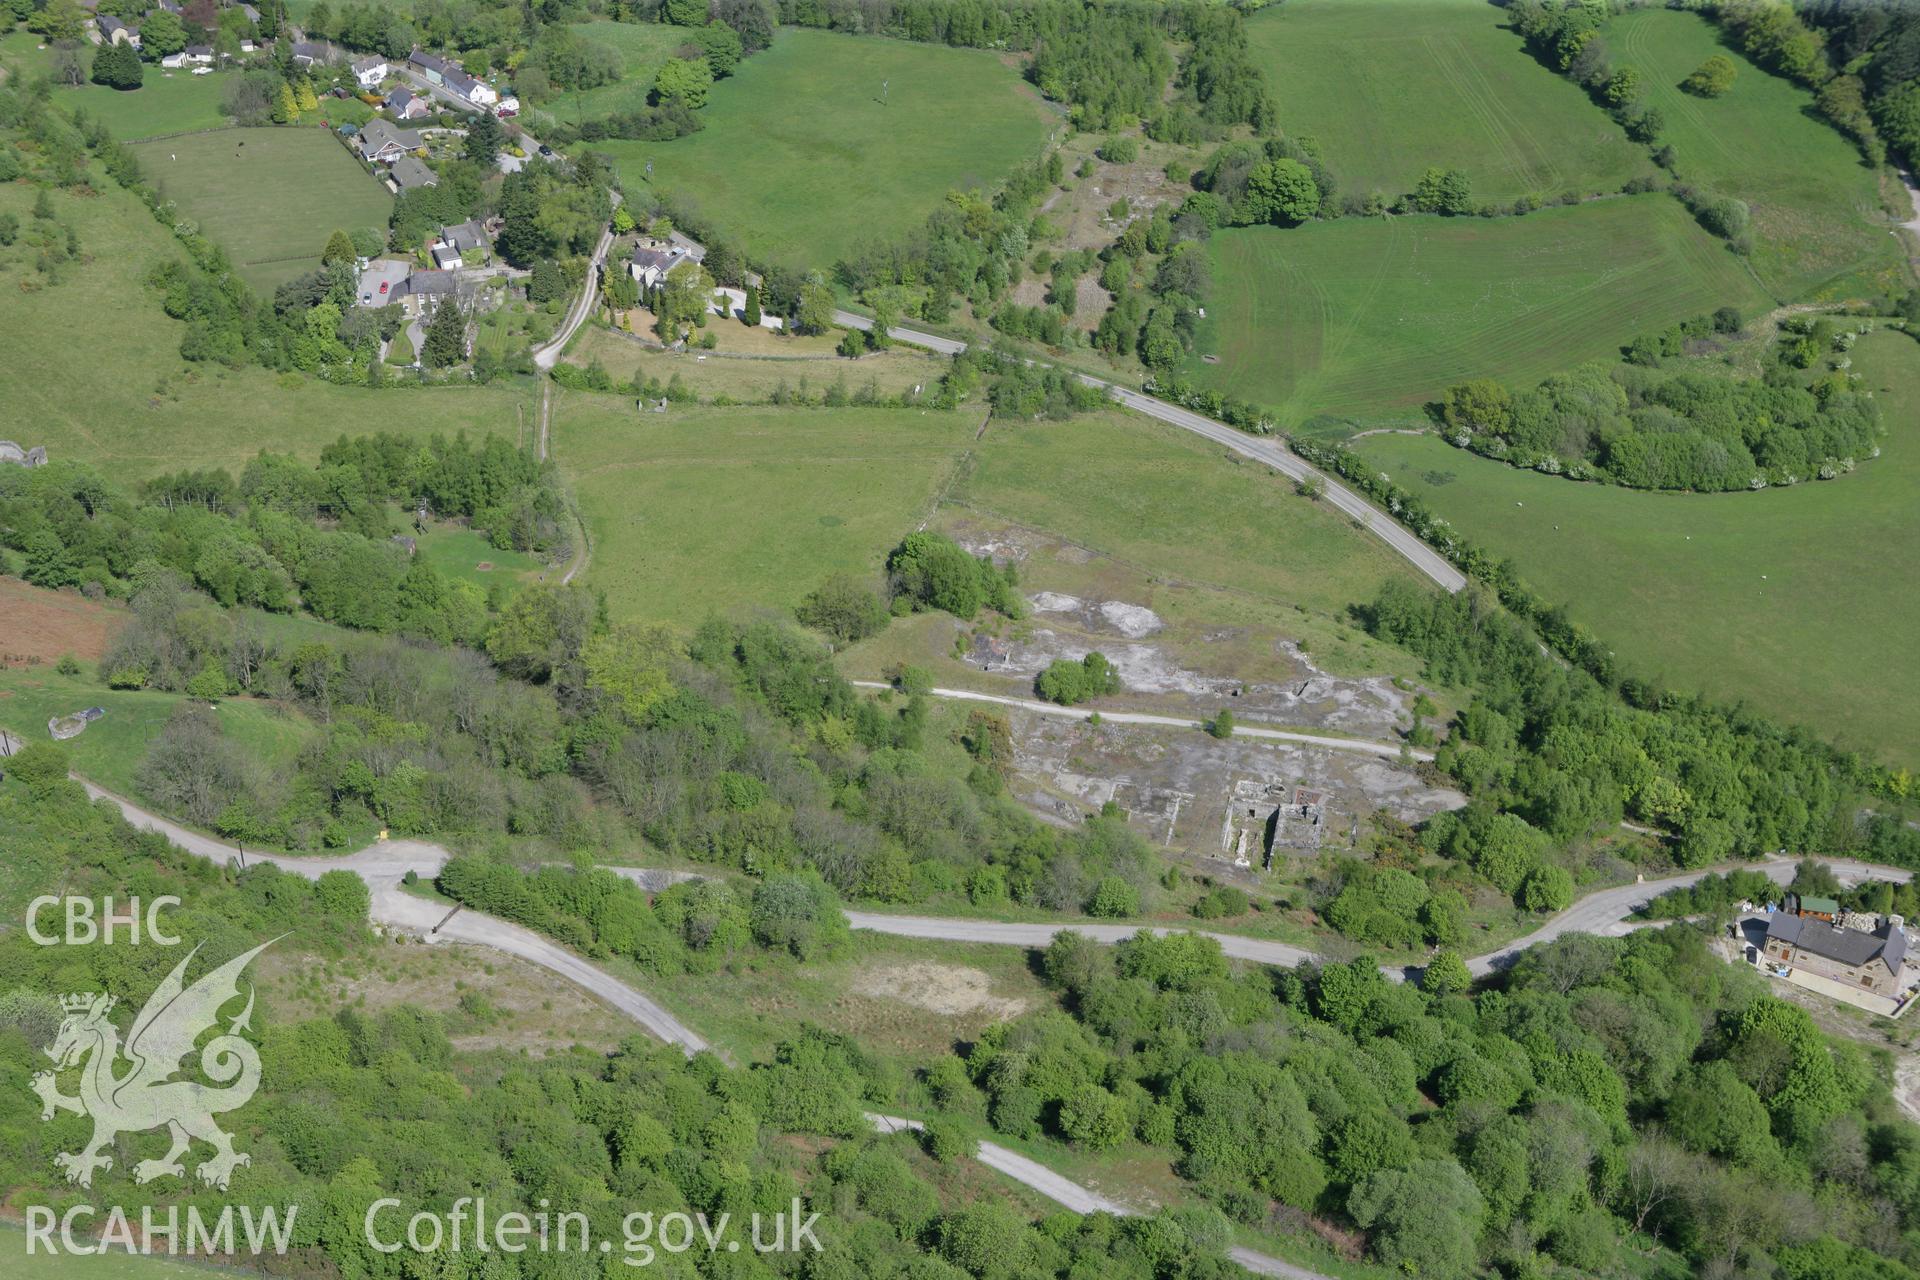 RCAHMW colour oblique photograph of Taylor's Shaft Lead Mine, Minera. Taken by Toby Driver on 03/05/2011.